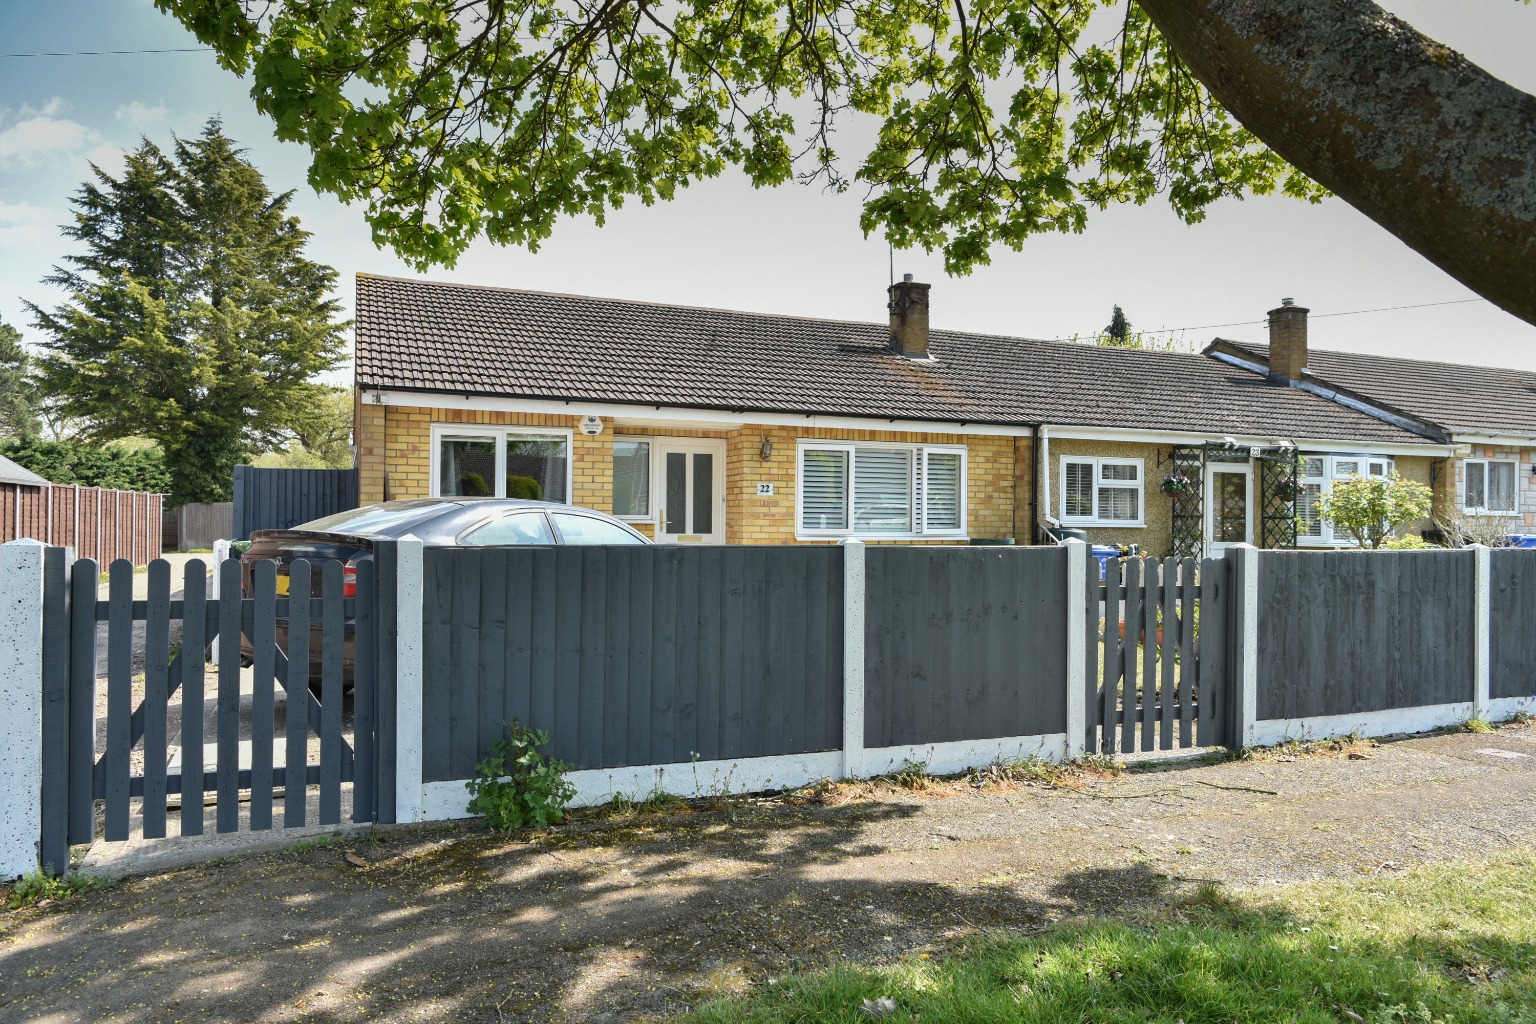 This semi-detached bungalow is located in a quiet cul de sac and offers spacious living accommodation with the addition of an extension.  The property is minutes away from The Green and local shops and other amenities such as the gym.